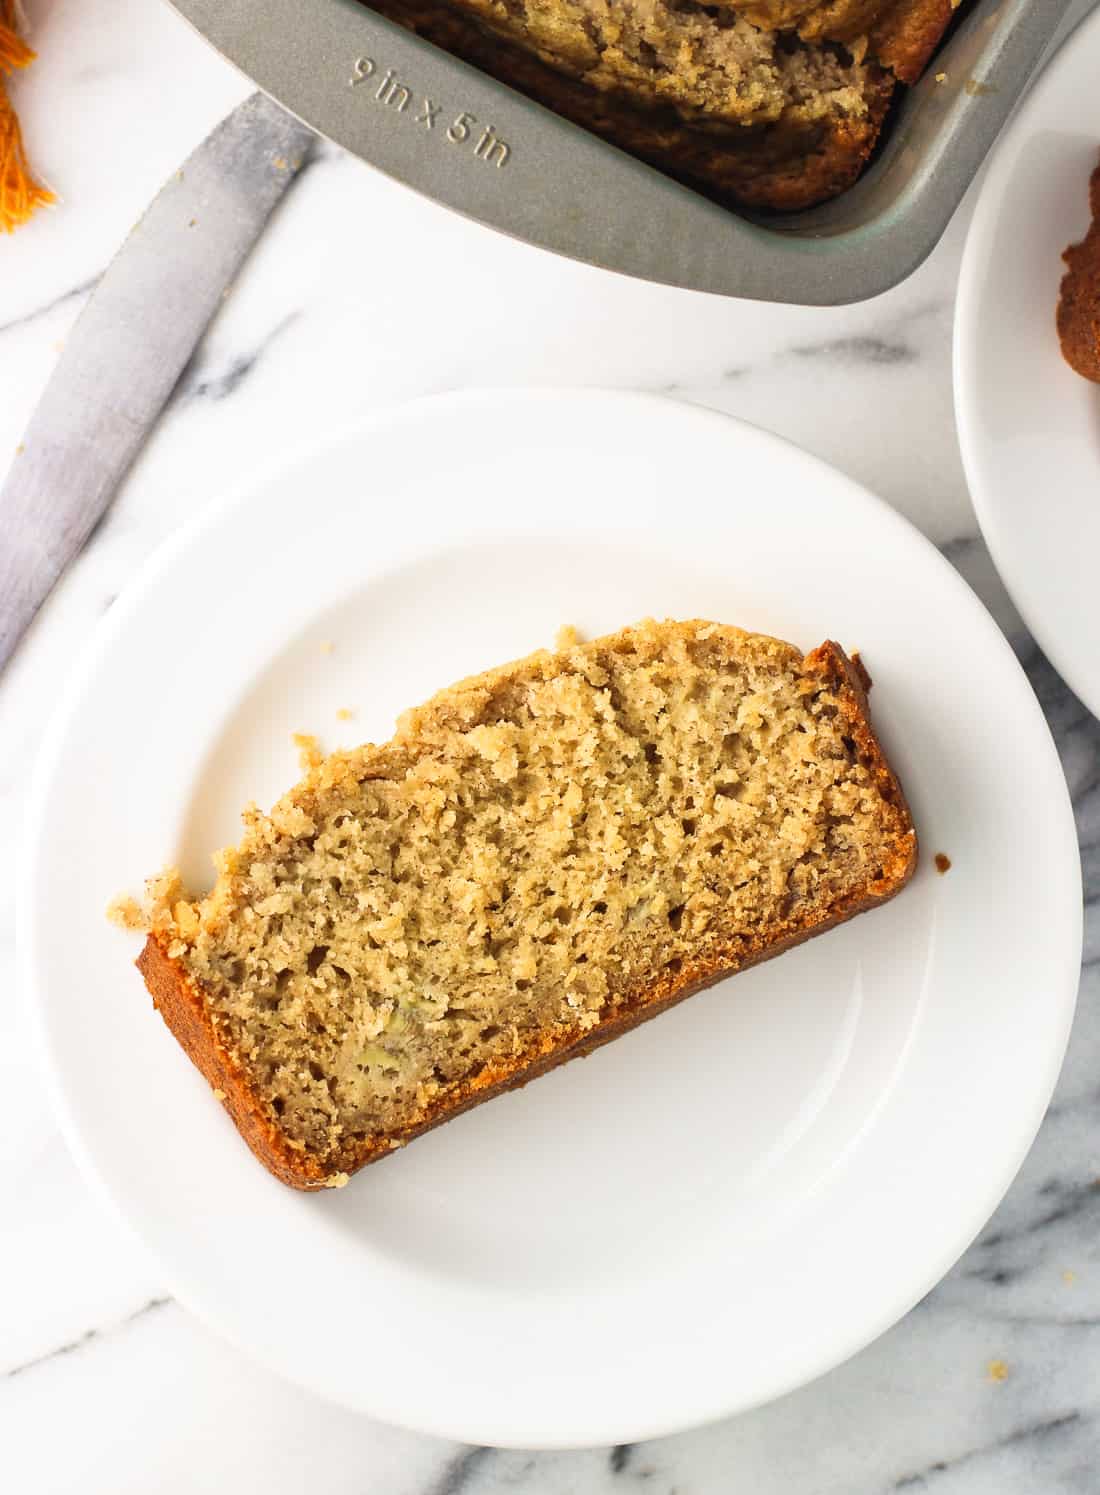 A slice of banana bread on a dessert plate next to the metal loaf pan.